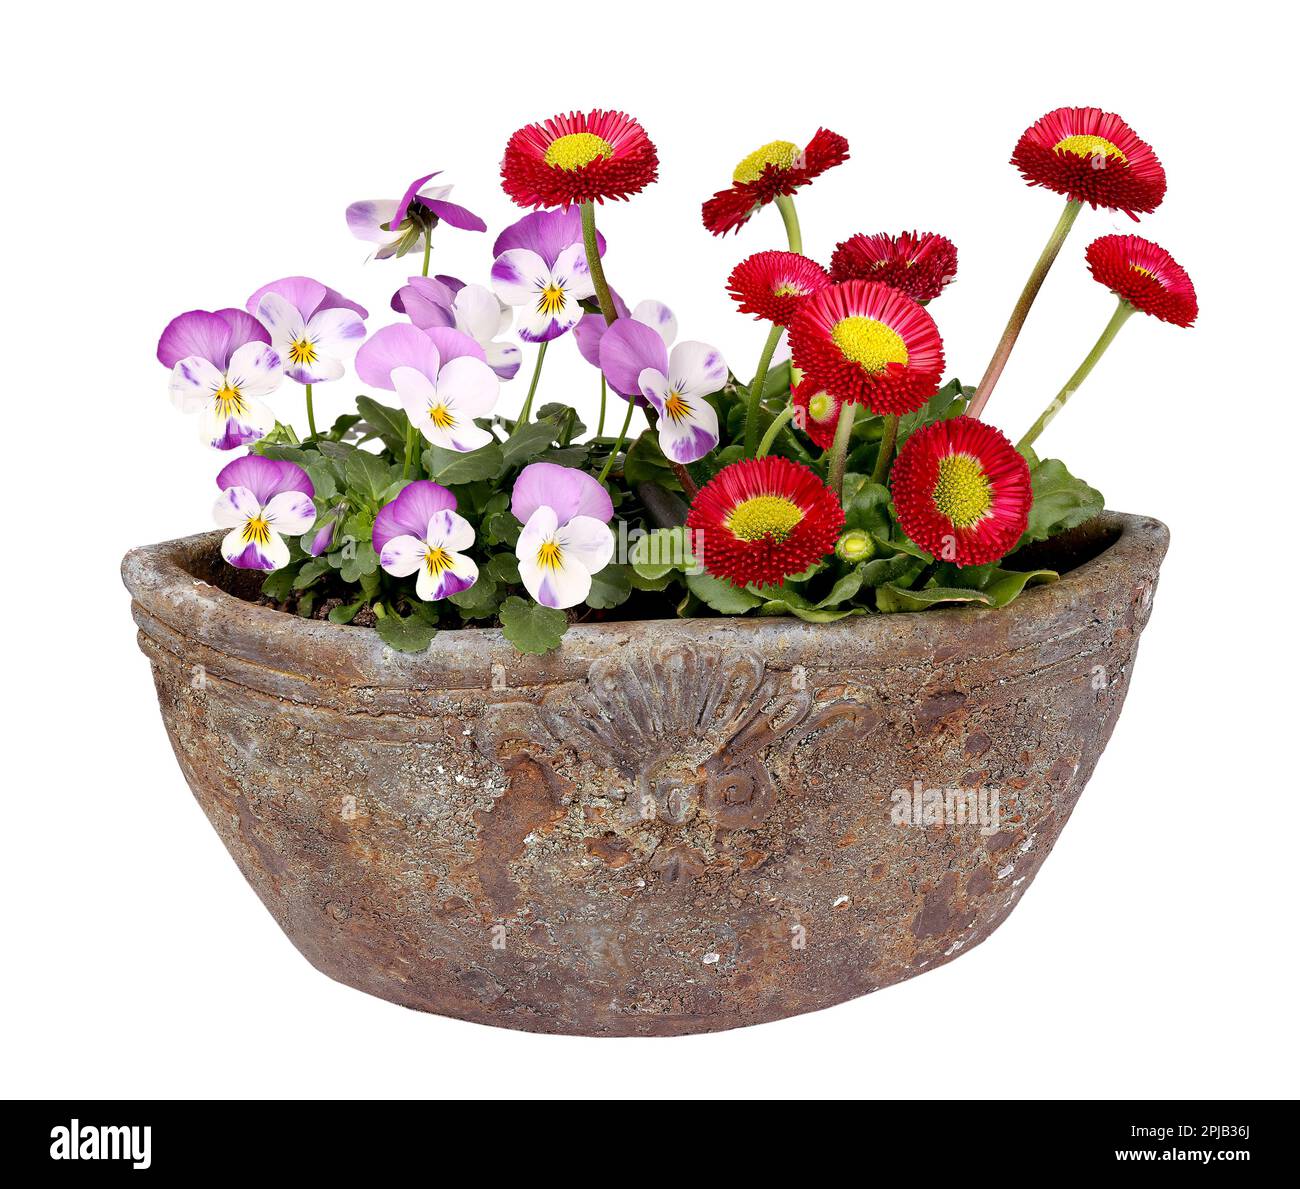 Red daisies and small pansies planted in vintage pot, isolated background Stock Photo